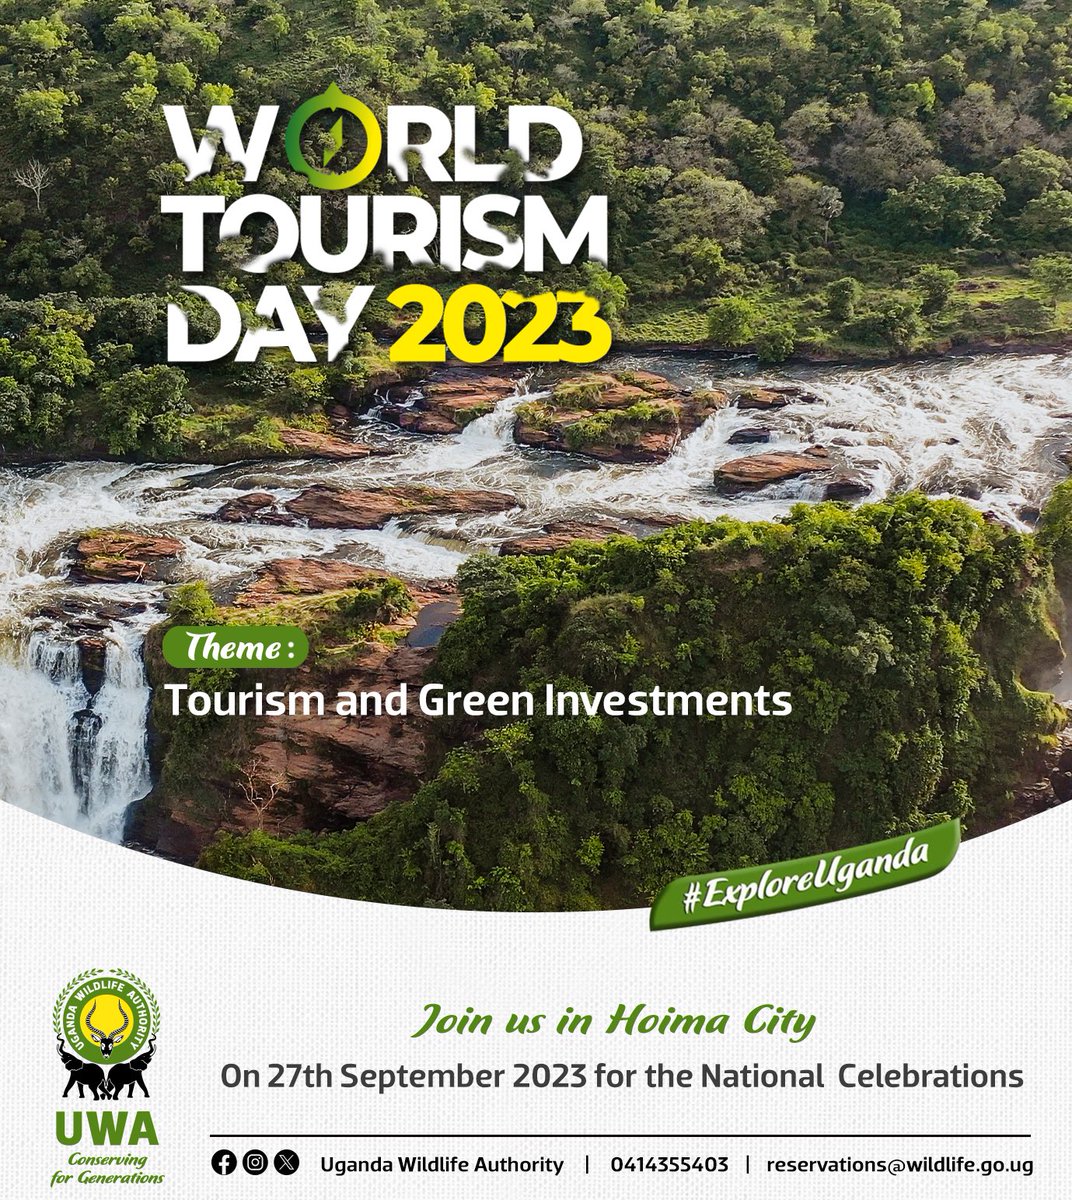 This year's #WorldTourismDay celebrations specifically remind us about the importance of sustainable developments. Uganda will join the rest of the world to celebrate this important day. The national celebrations will be held in Hoima City on 27th September 2023. #ExploreUganda